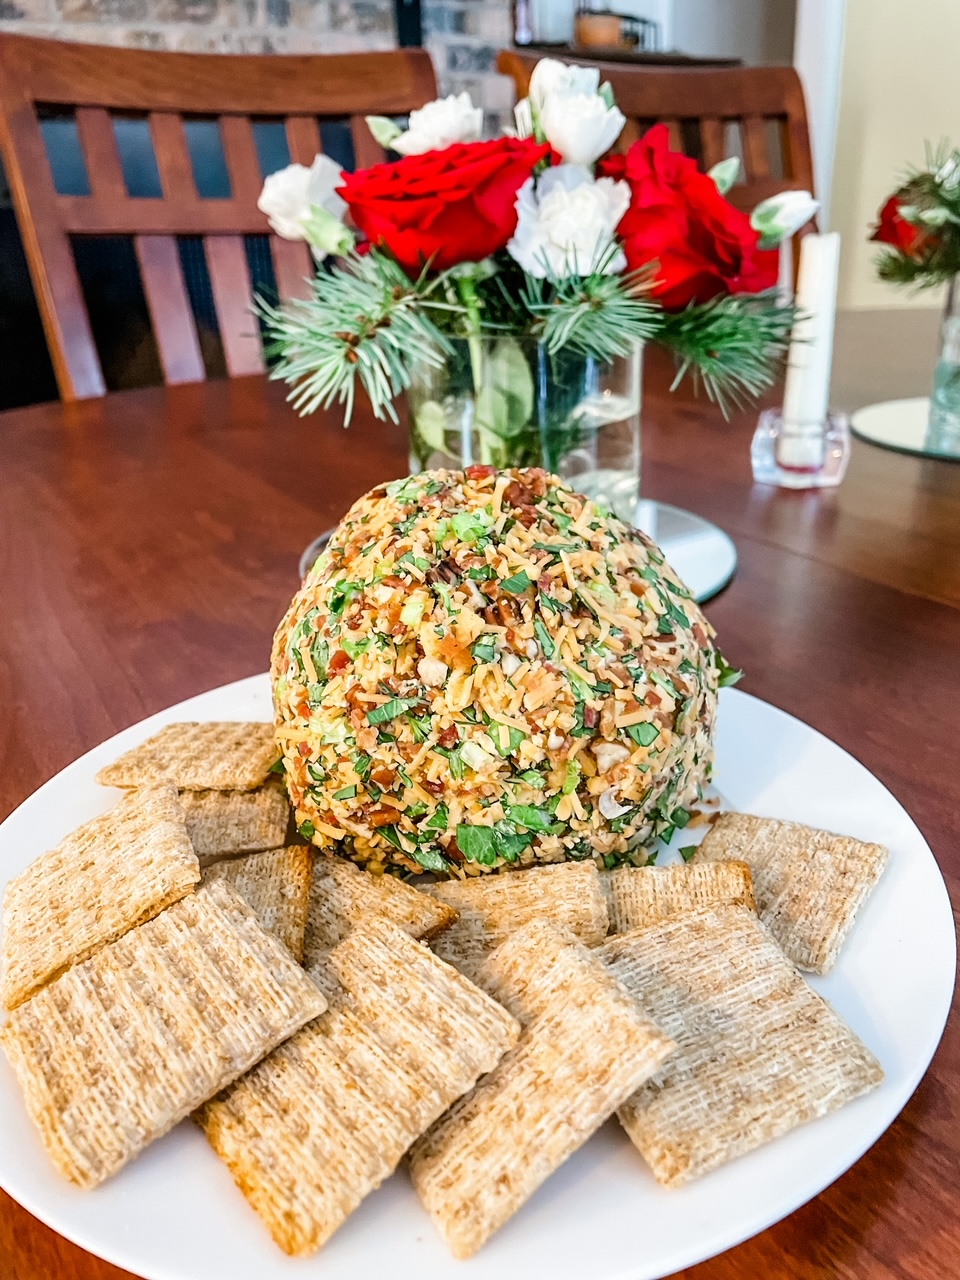 The finished Best Holiday Cheese Ball with crackers and a bouquet of flowers behind it.